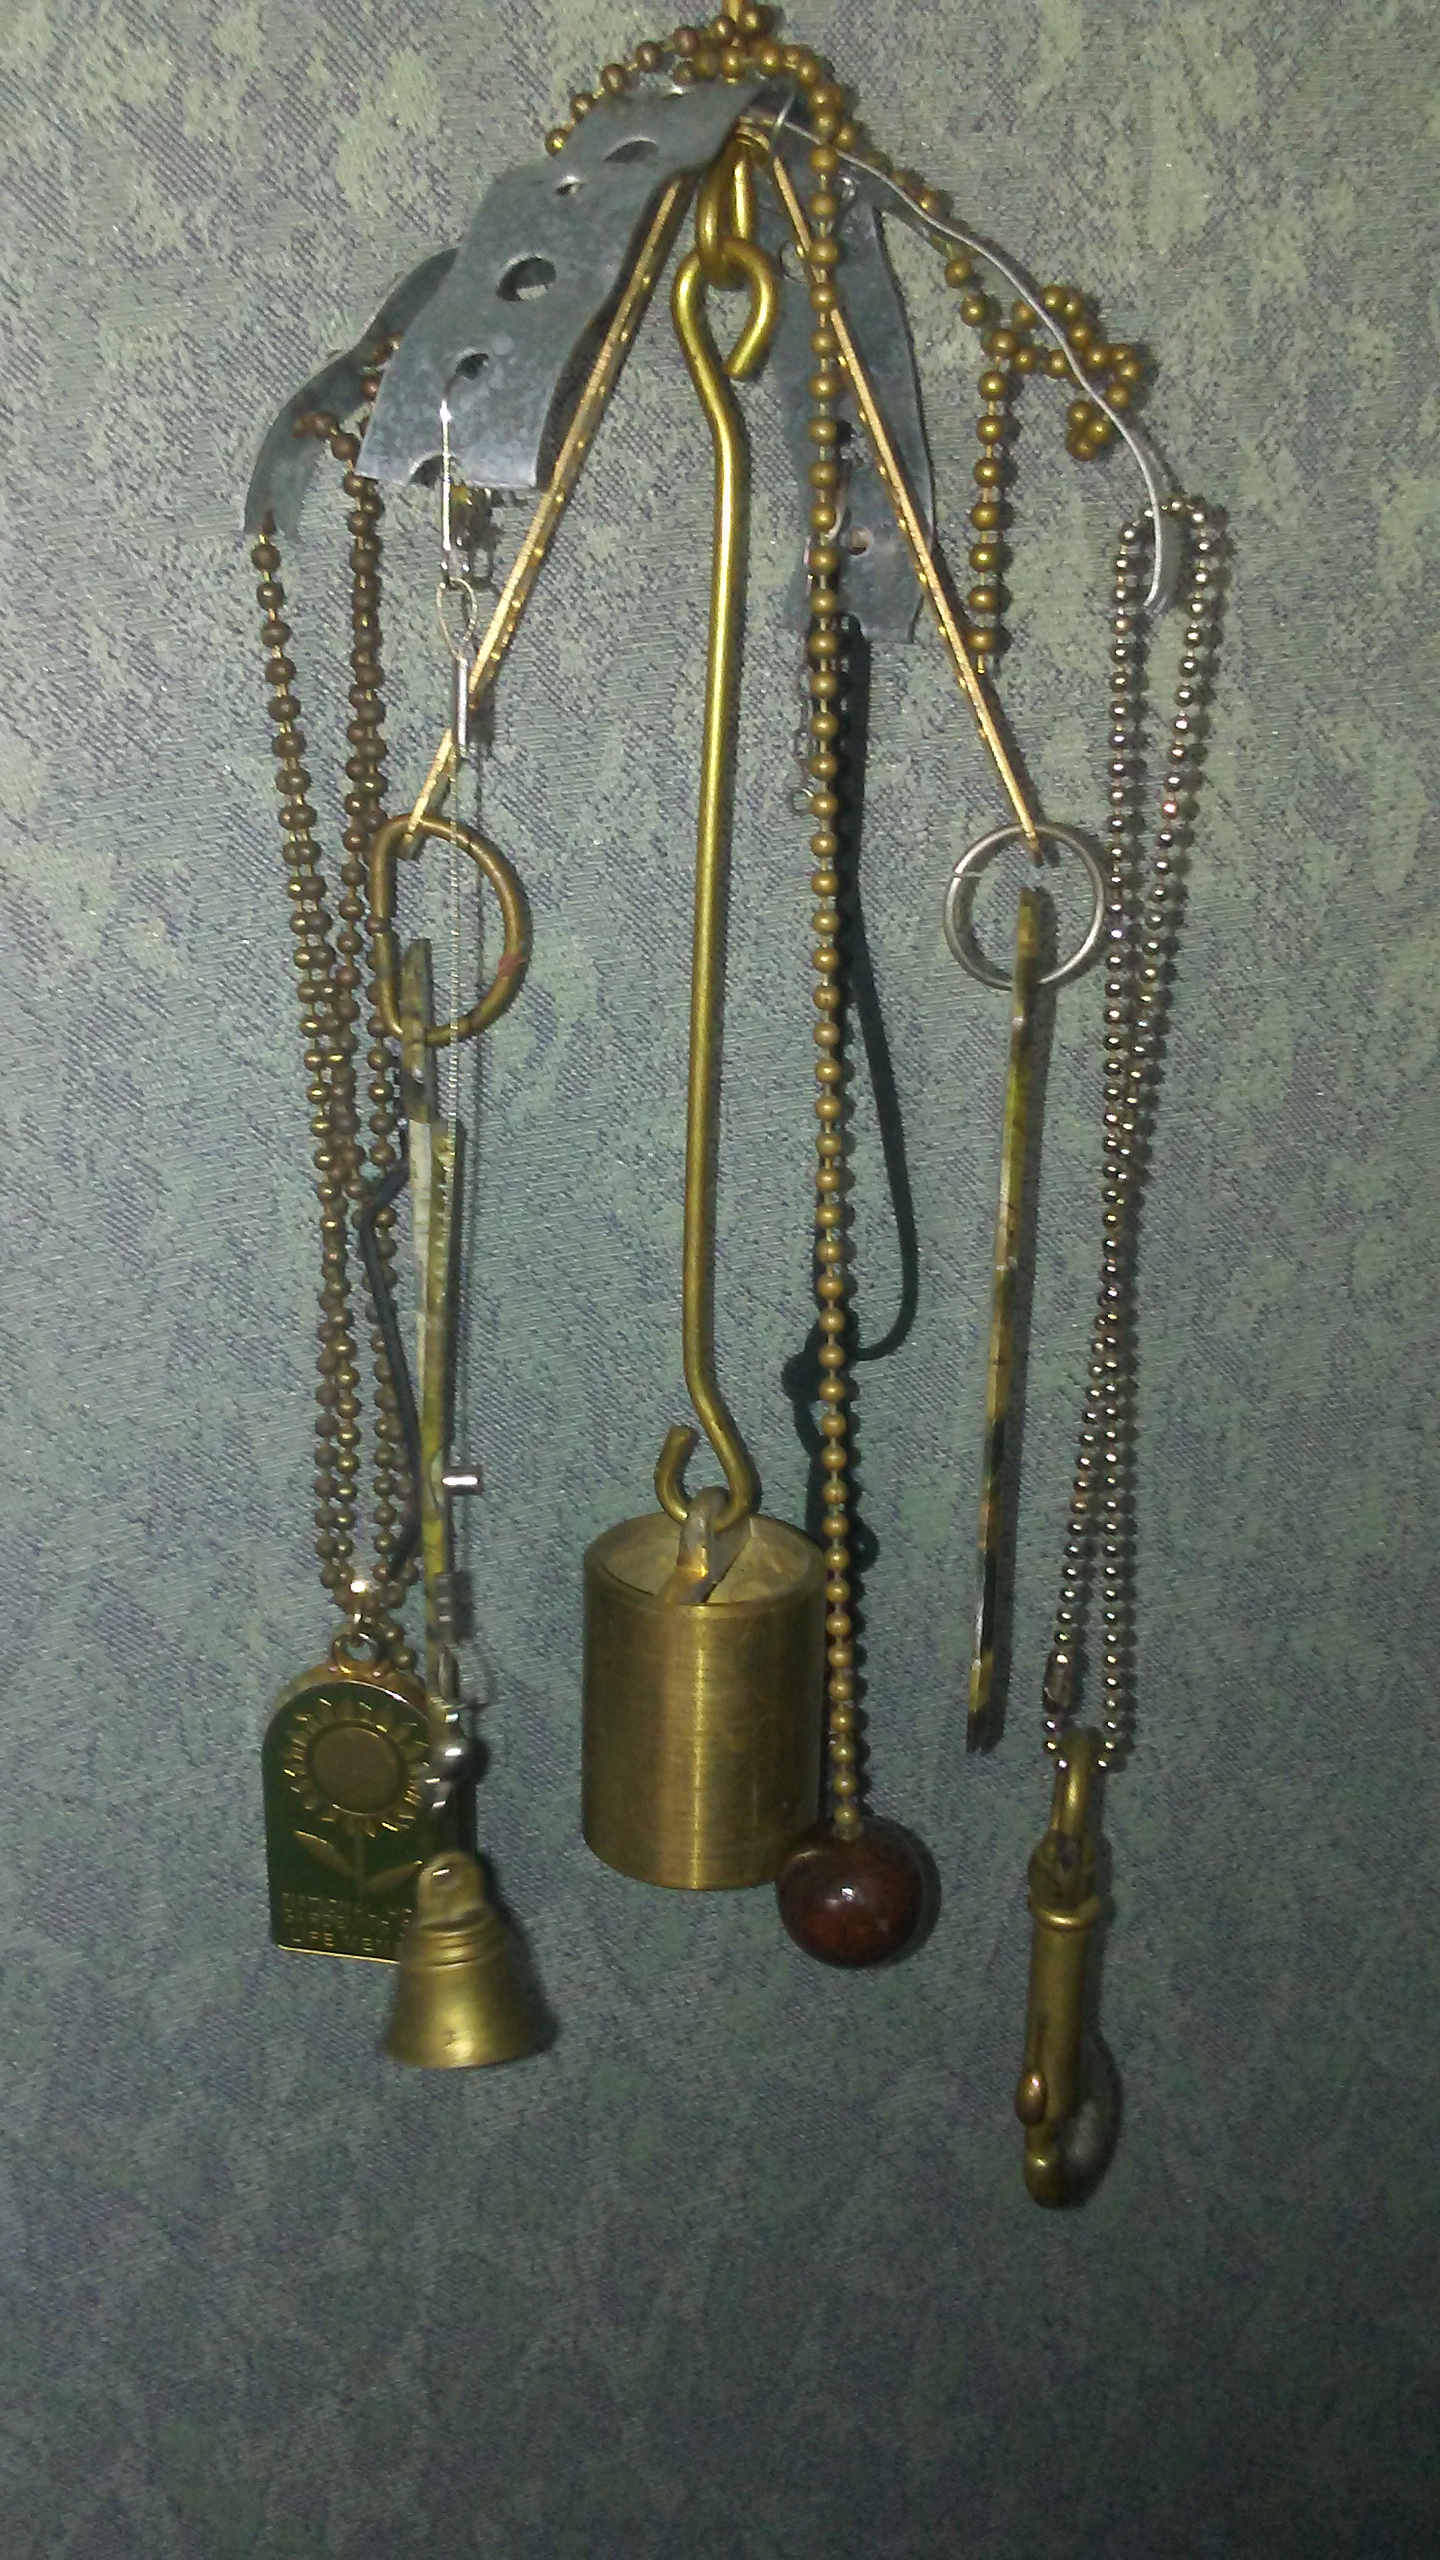 Metal Wind Chime Made of Found Objects Including Brass weight, Clamps, Lamp chain, Green and Brass Key fob, Brass Bell, Green Camo Pocket Knife Parts.